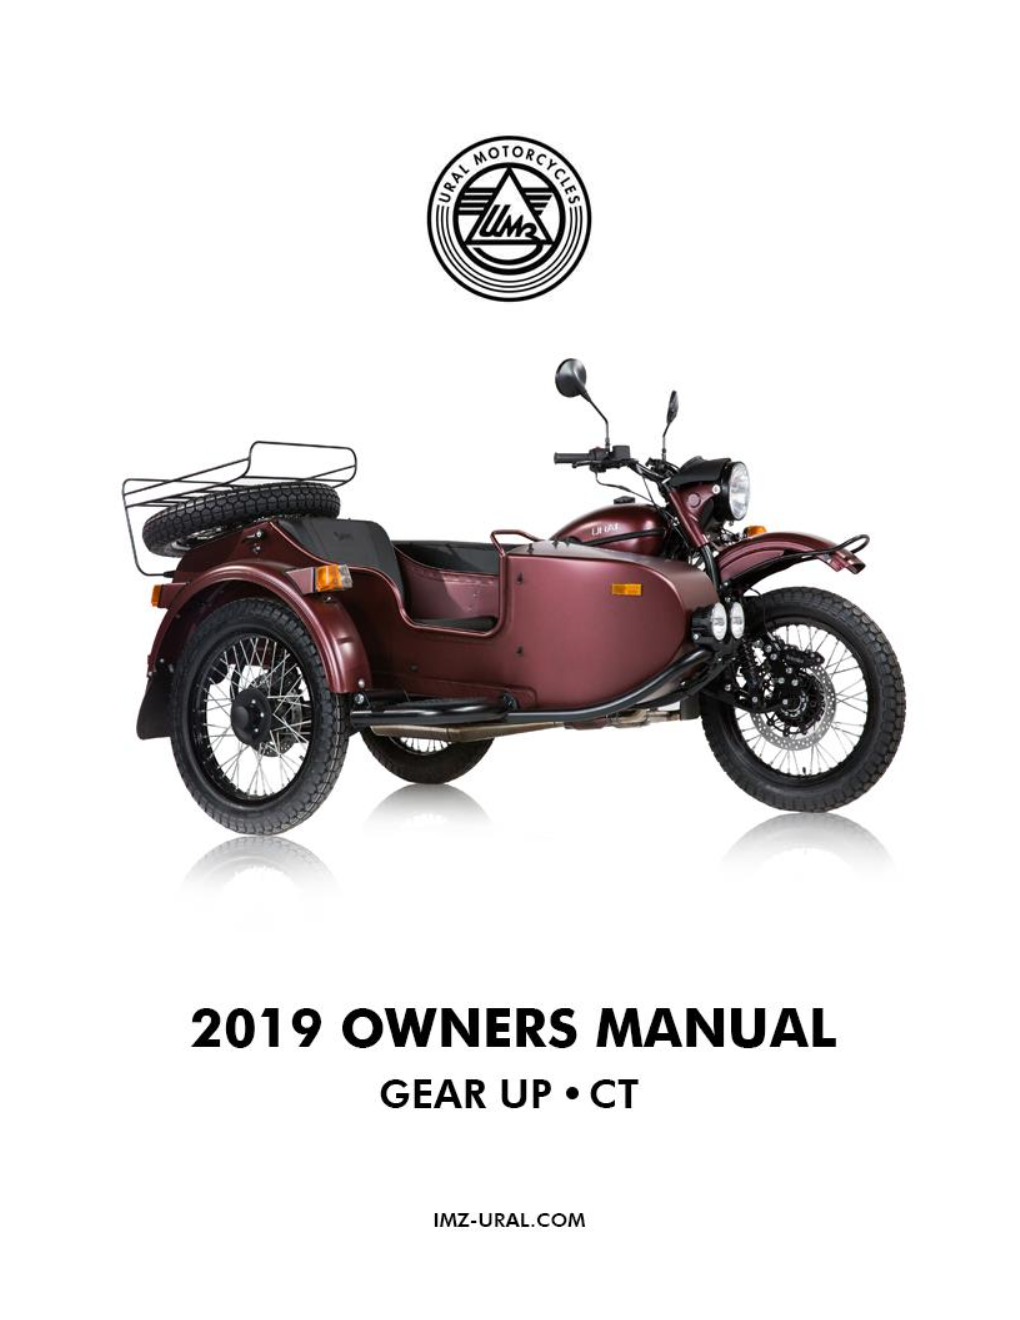 2019-Gear-Up Ct-Manual-Working